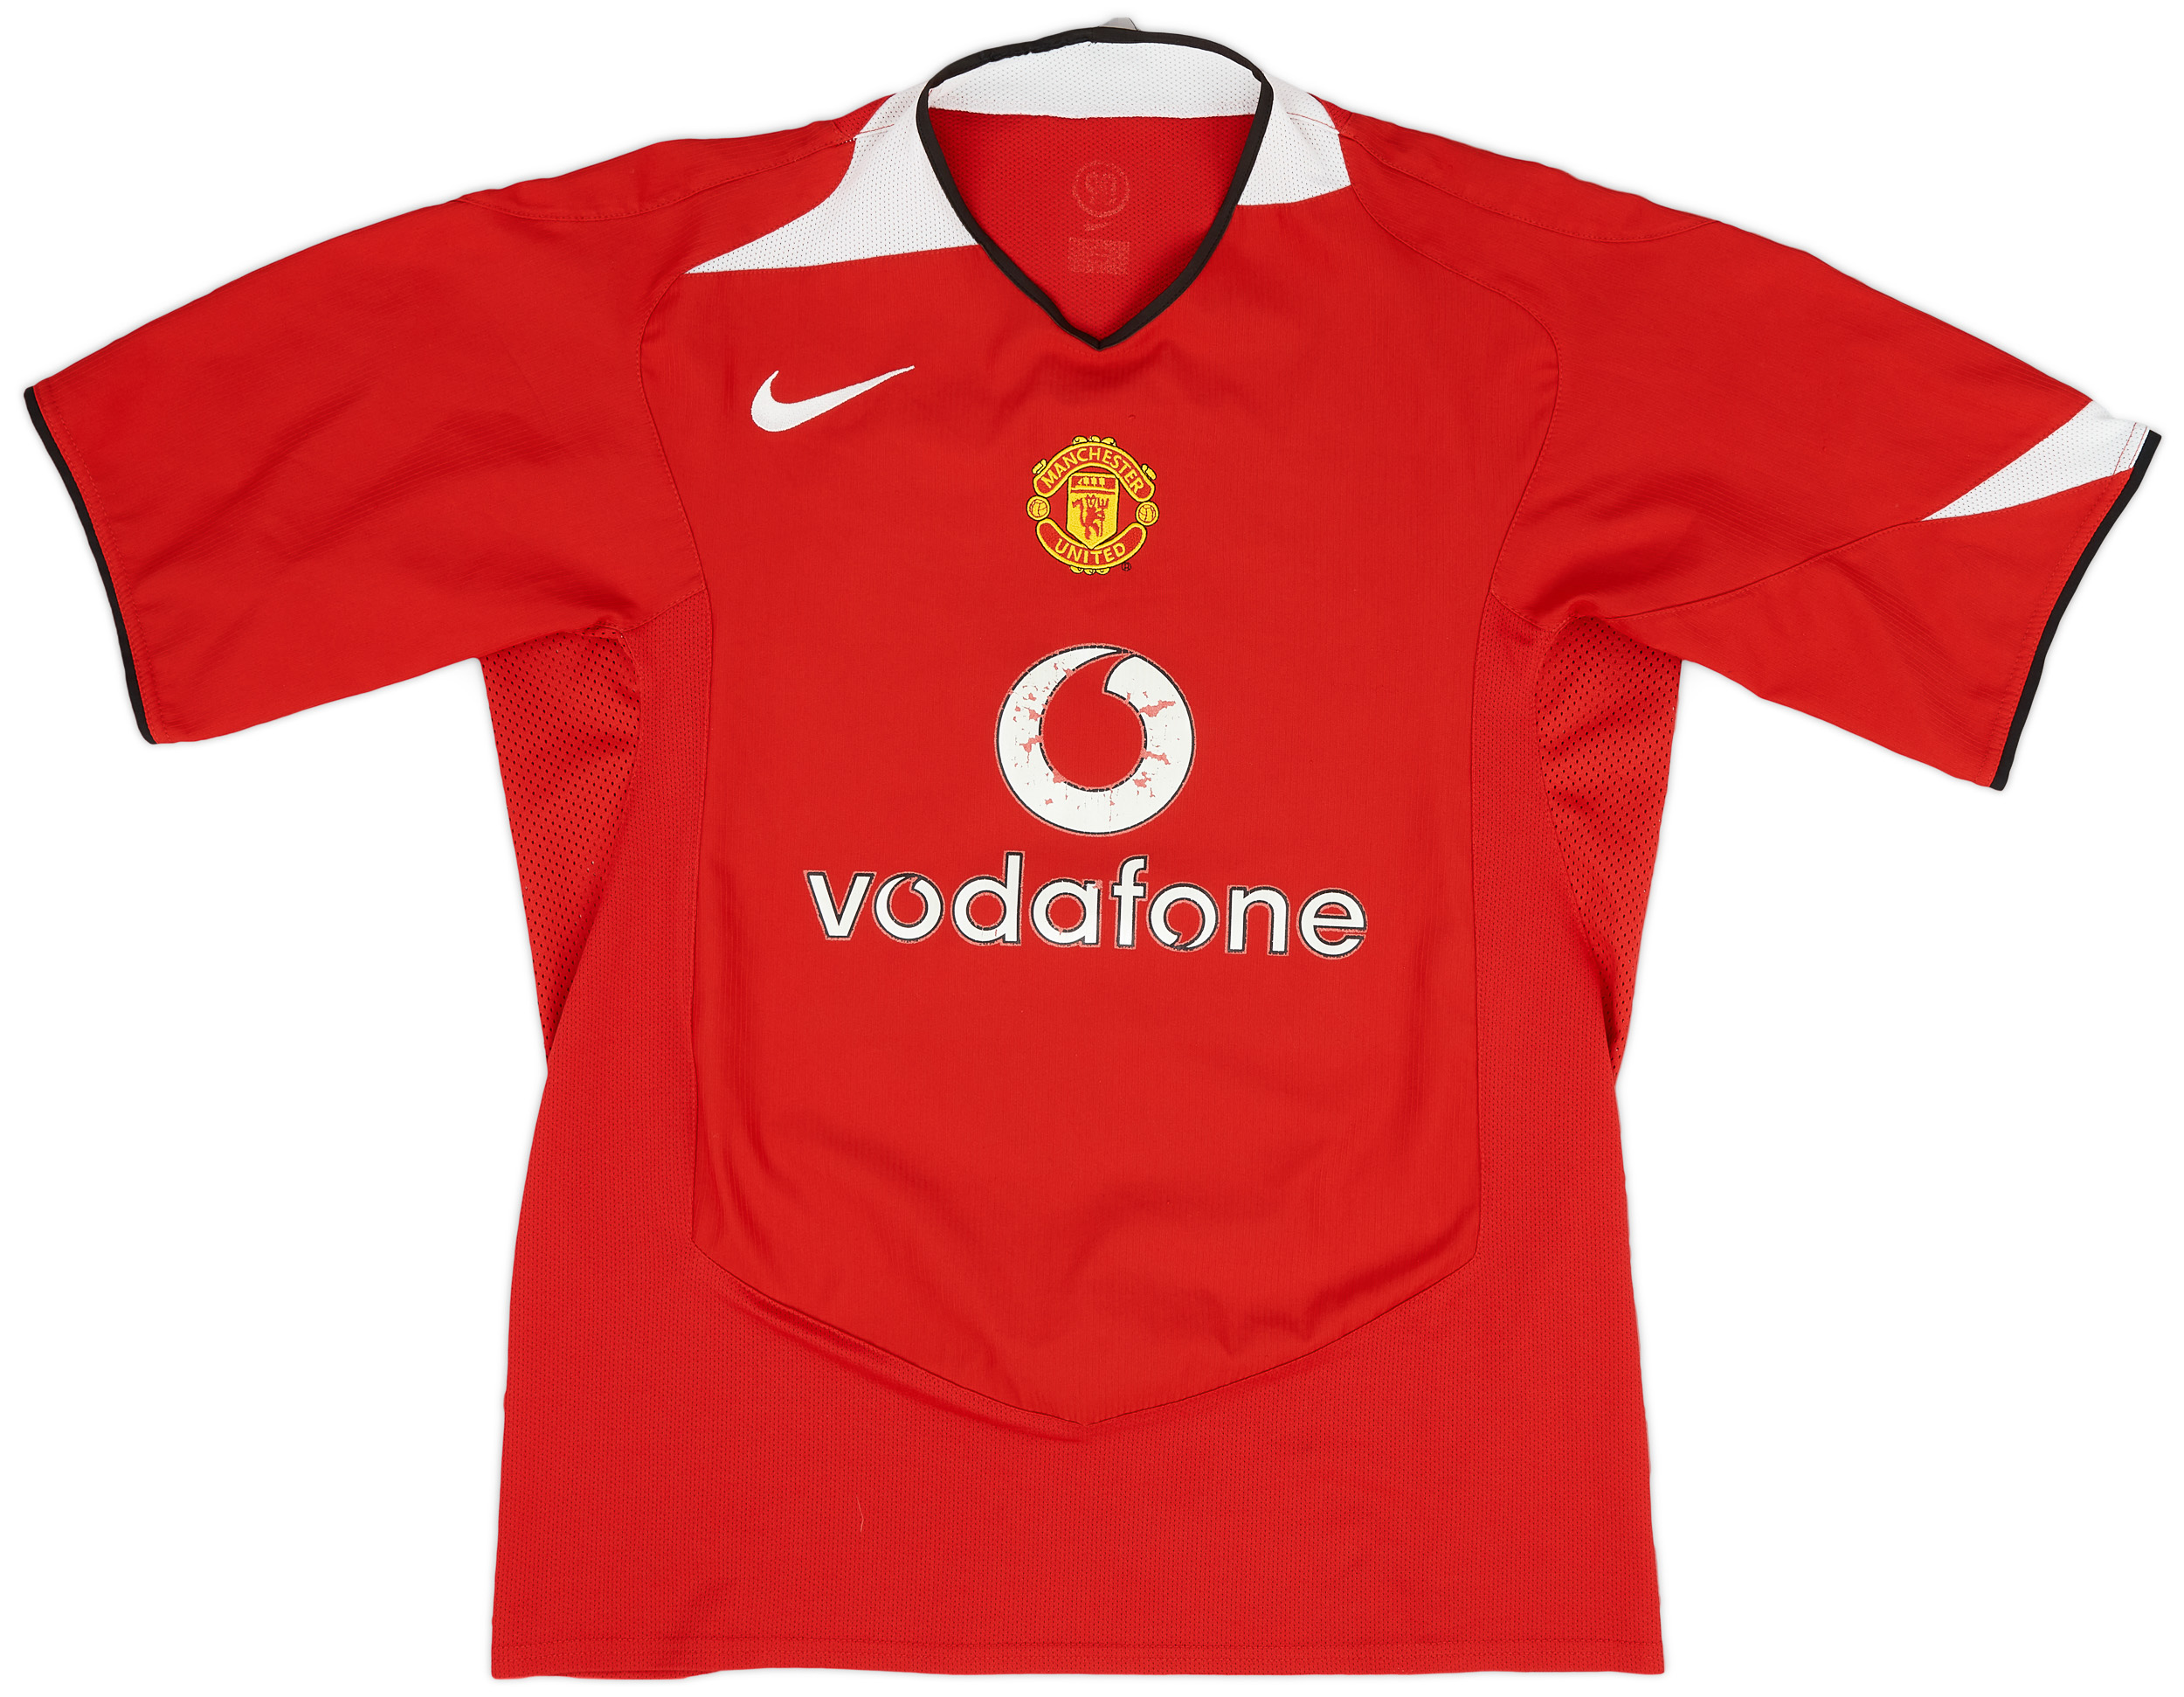 2004-06 Manchester United Home Shirt - 5/10 - ()